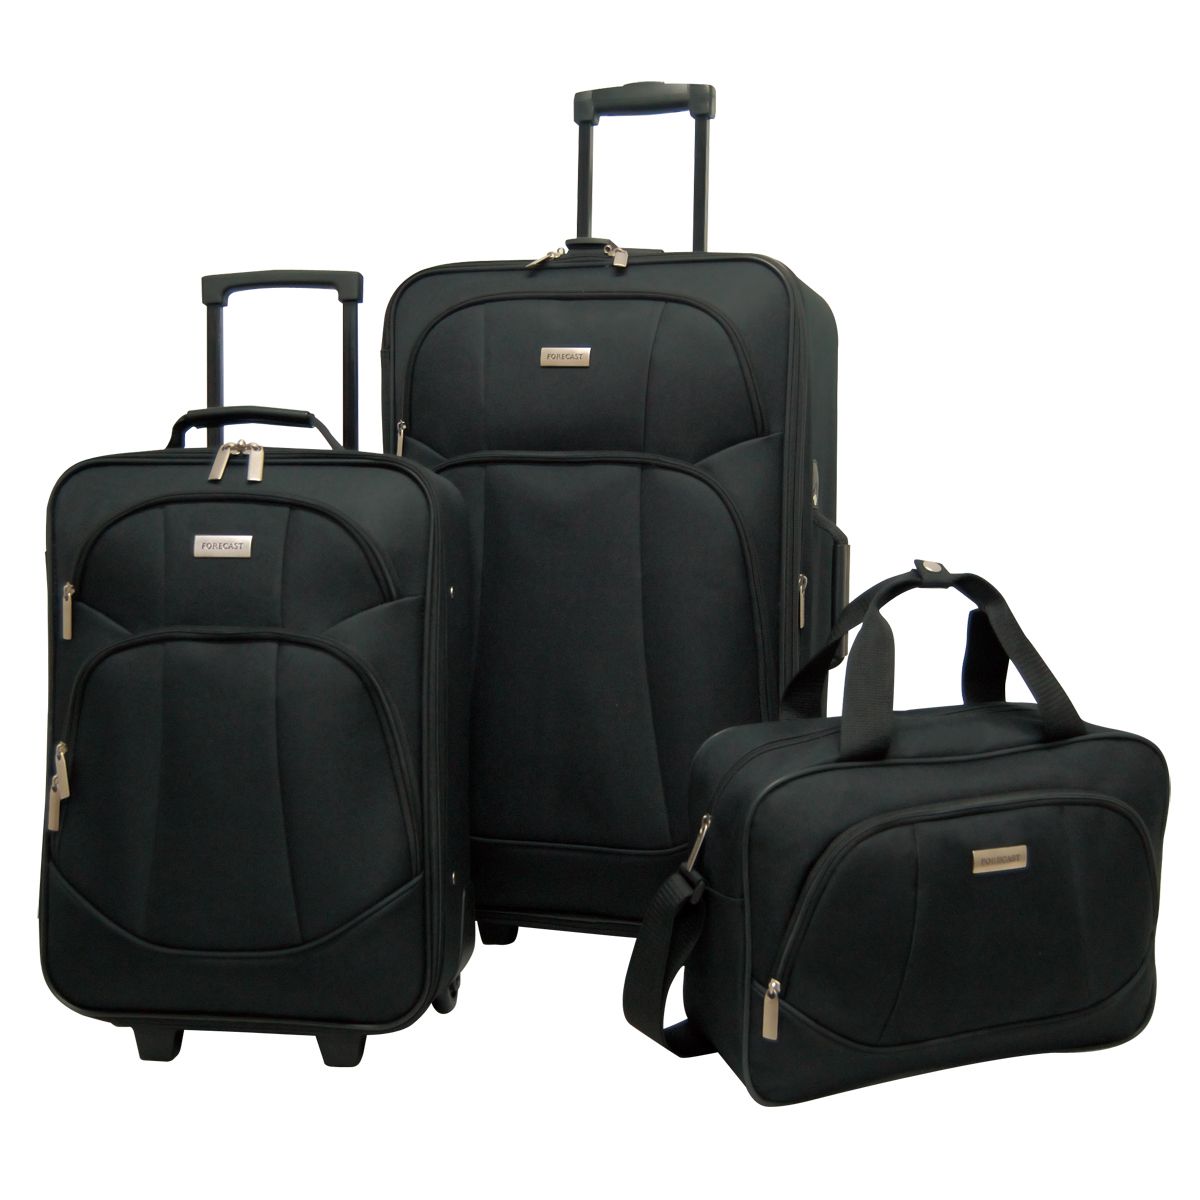 Forecast Fiji 3 Piece Luggage Set: Travel Better with Sears